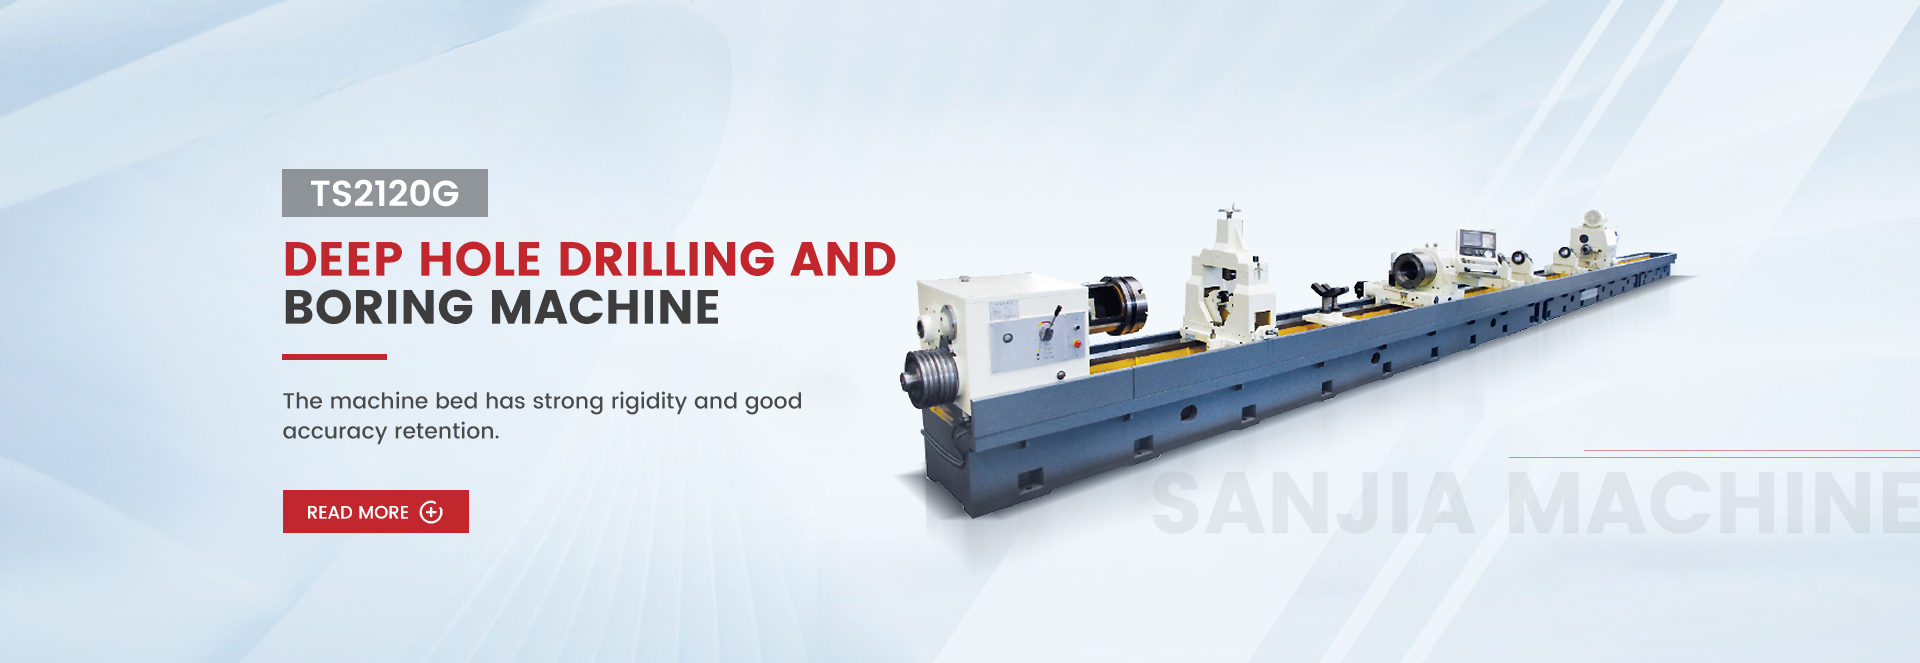 CNC Deep Hole Boring And Scraping Machine